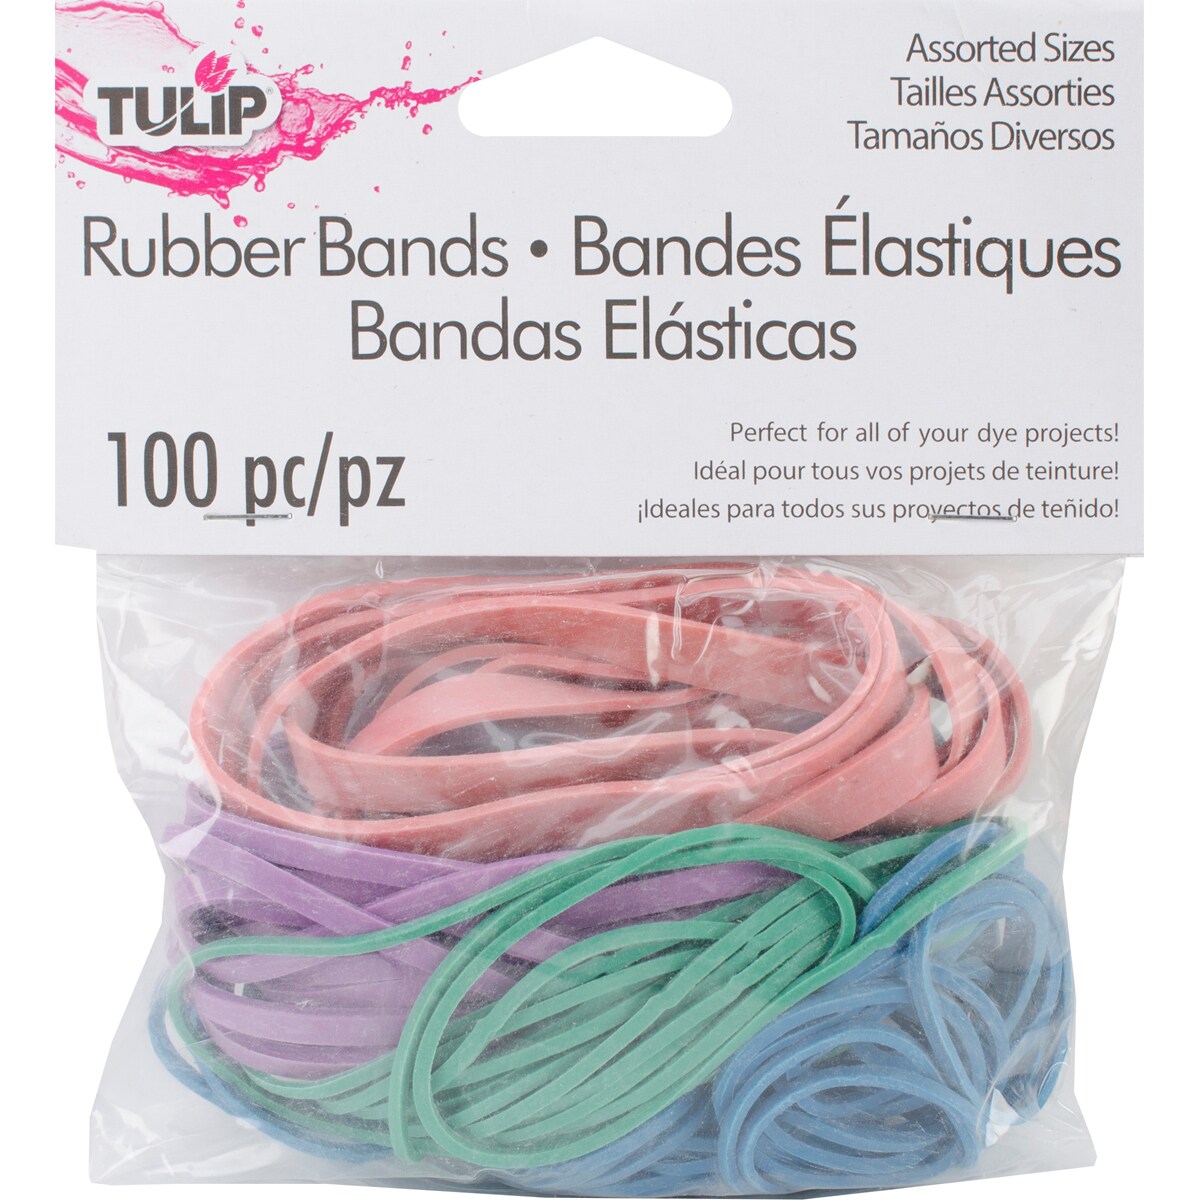 yeewenmo Rubber Bands Assorted Sizes(#64 & #33), Colored Latex Free Rubber Band Bulk Thick, Mixed Dimensions Size 64 & Size 33 Strong Elastic Bands for